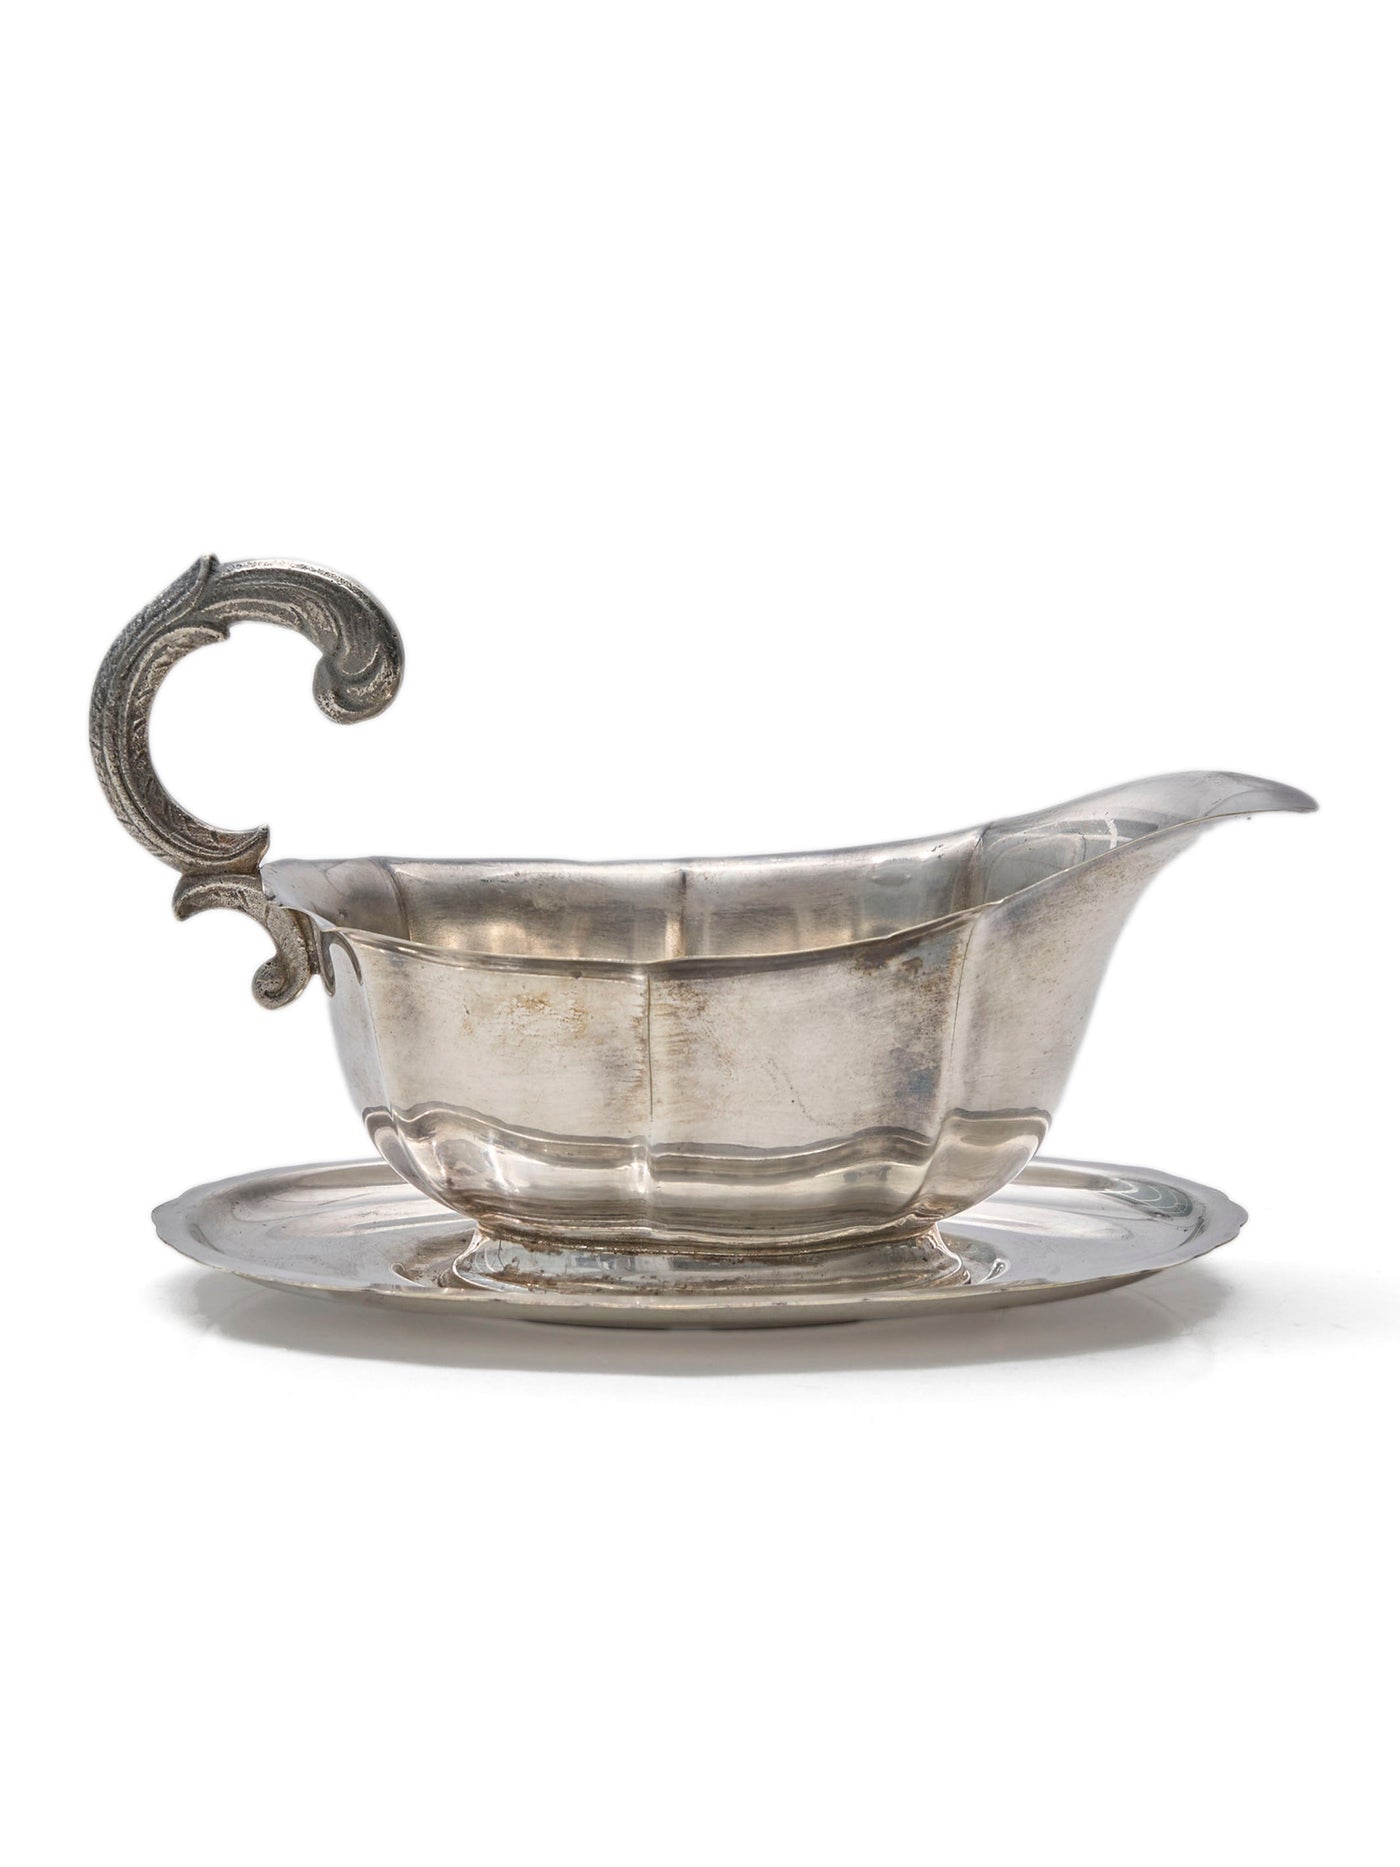 Vintage Silver Saucier from France with Scalloped Edge.